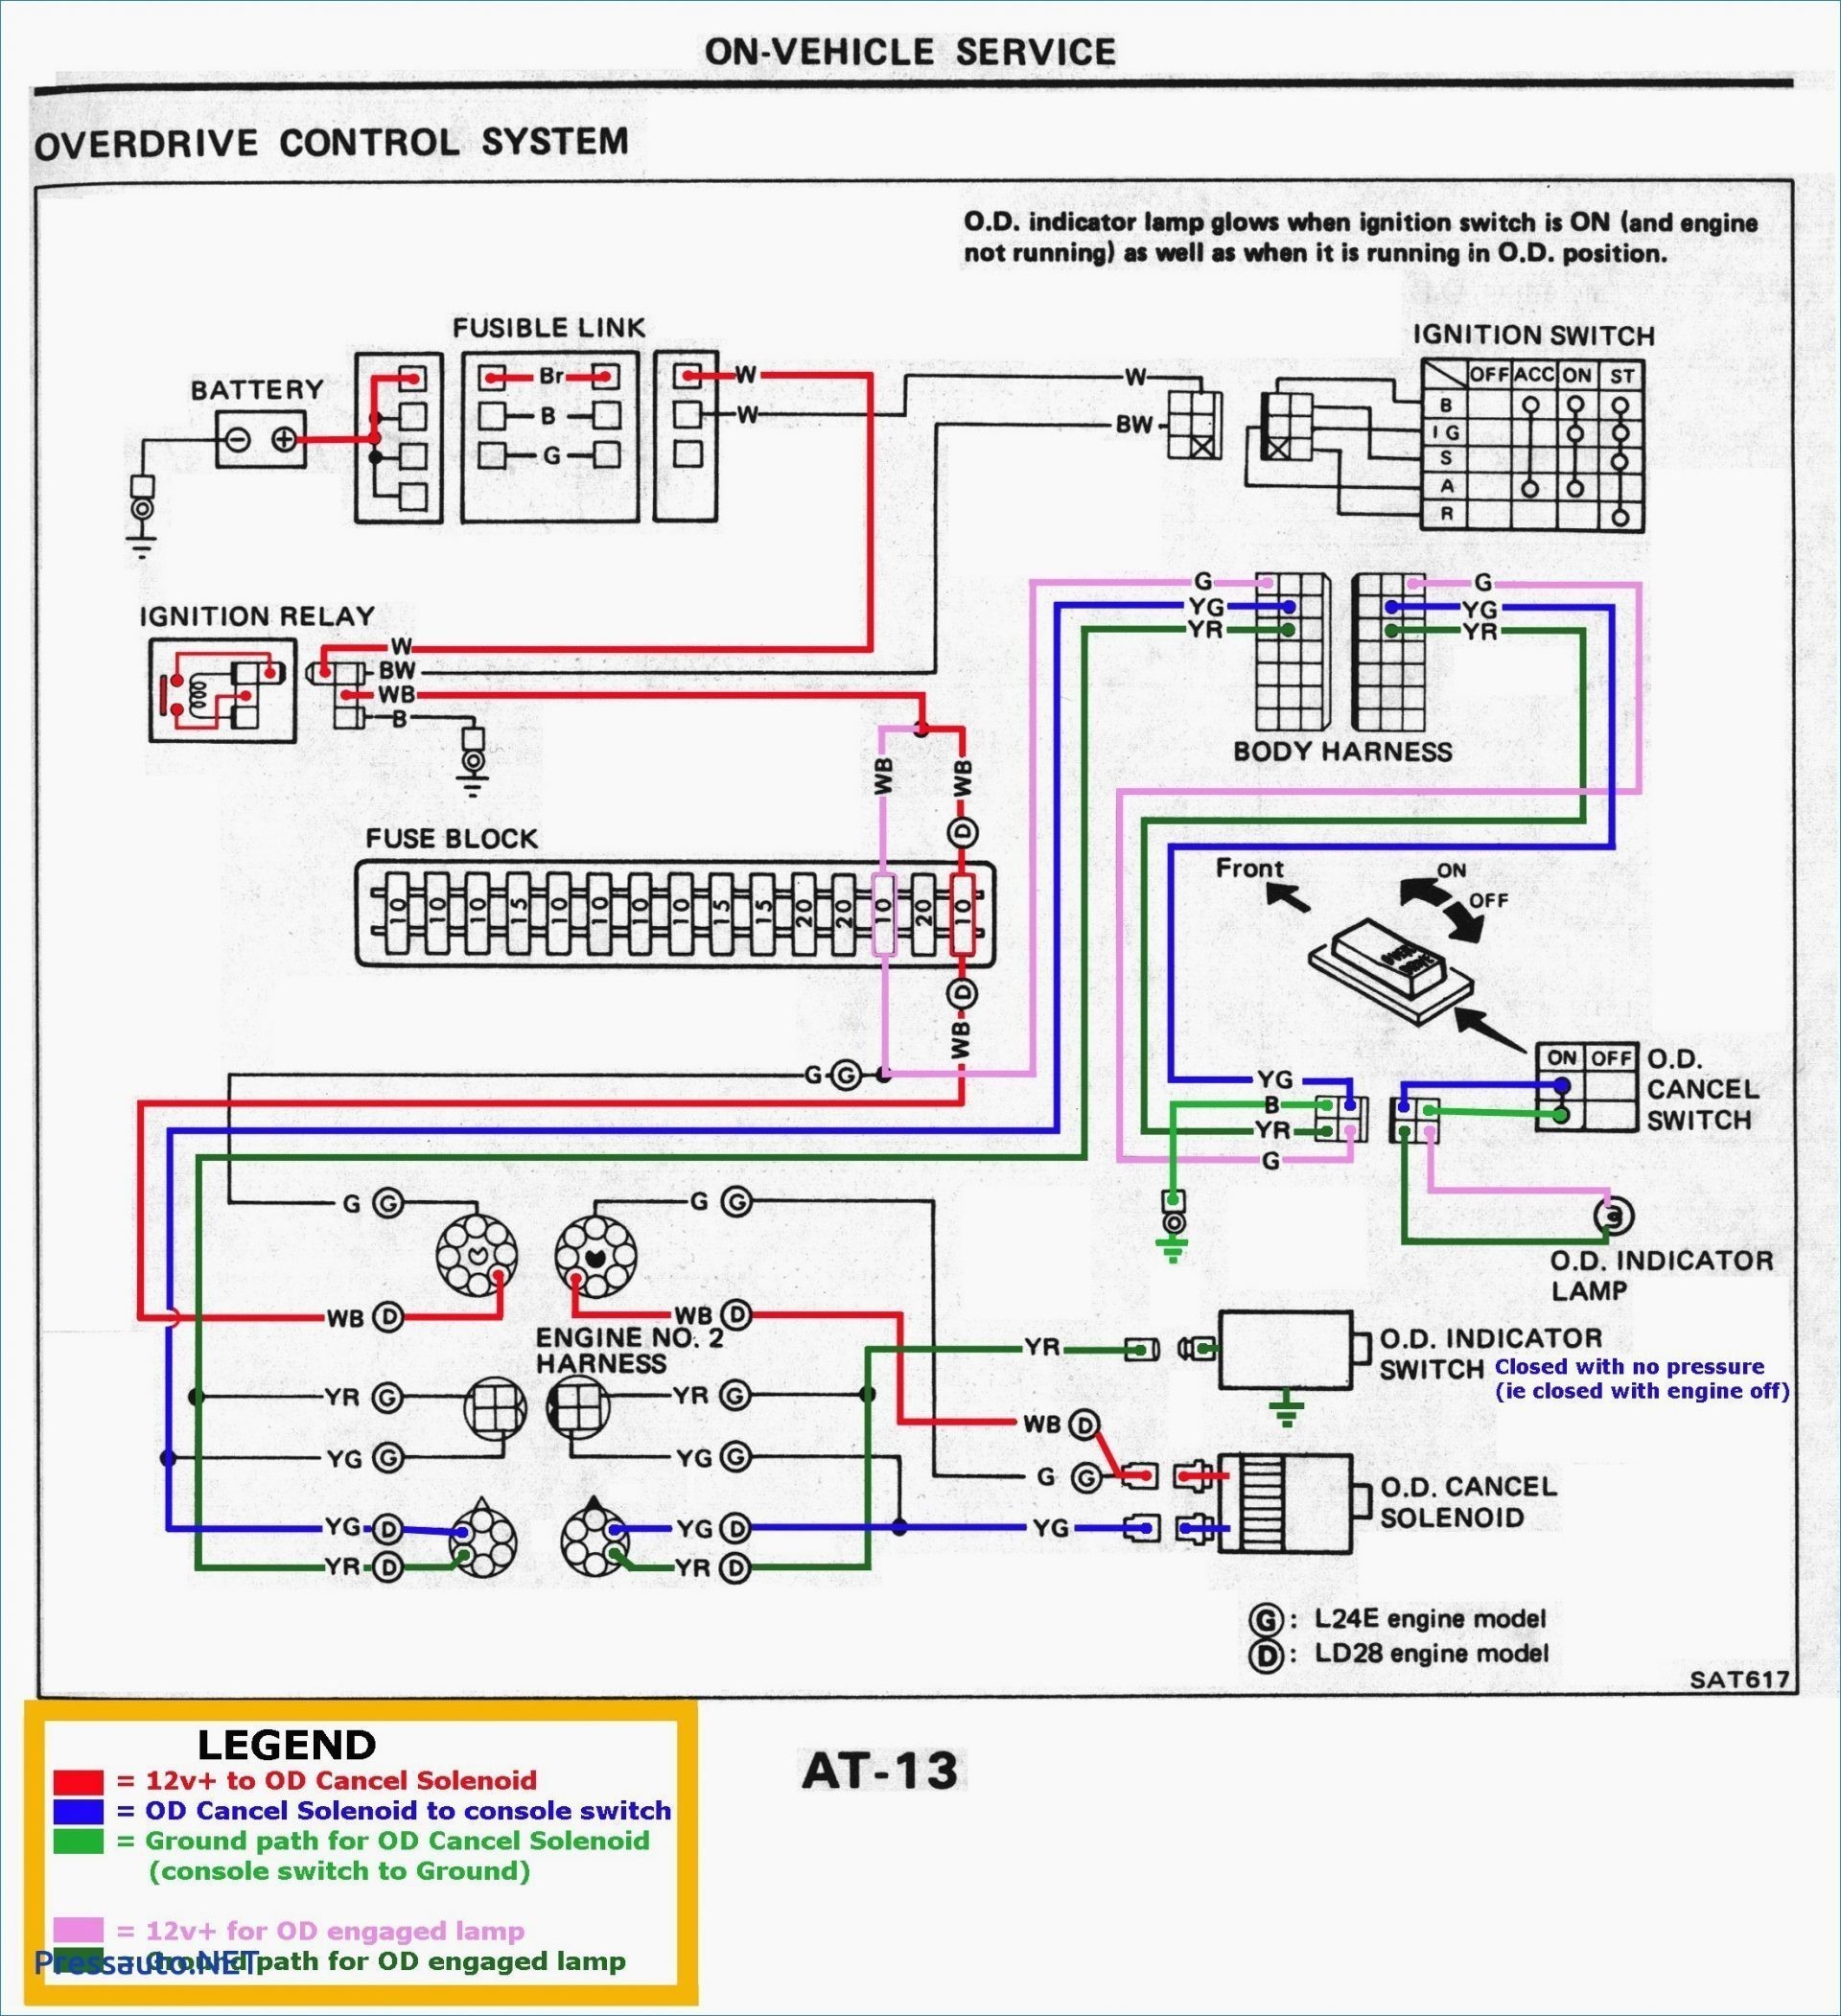 Alarm Wiring Diagrams for Cars New Vehicle Alarm System Wiring Diagram